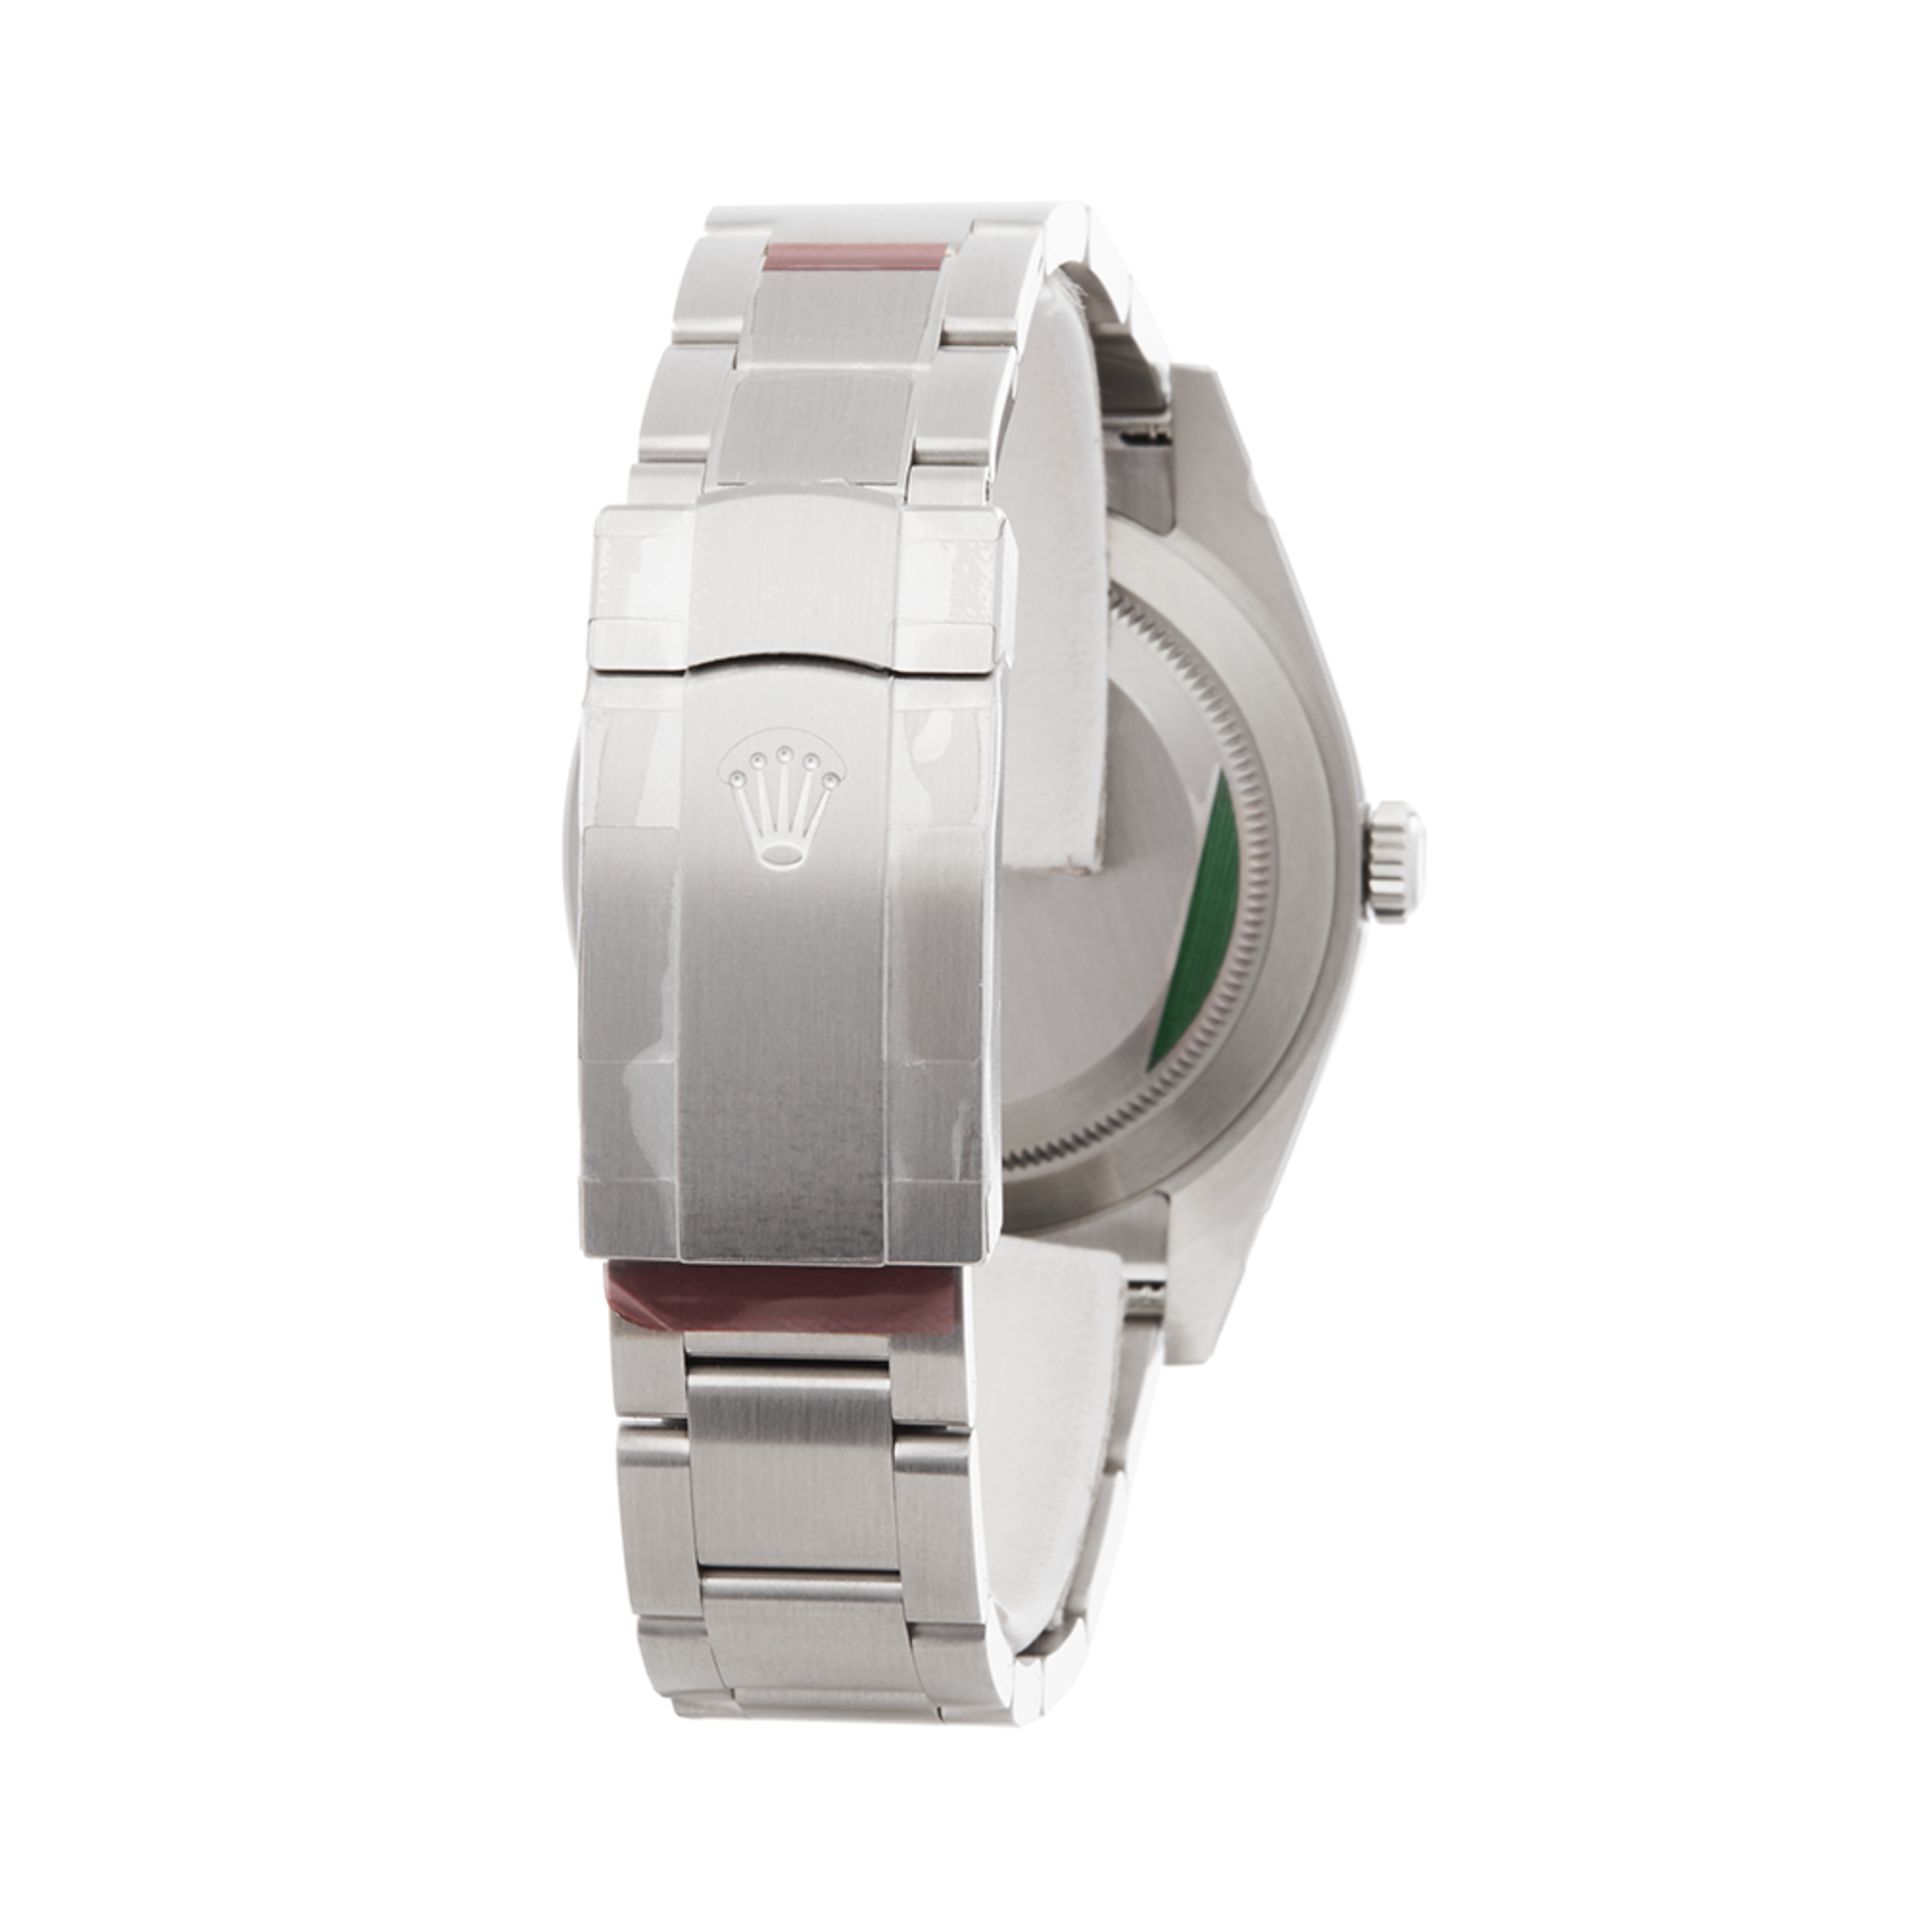 Rolex Oyster Perpetual Grape Stainless Steel - 114300 - Image 6 of 7